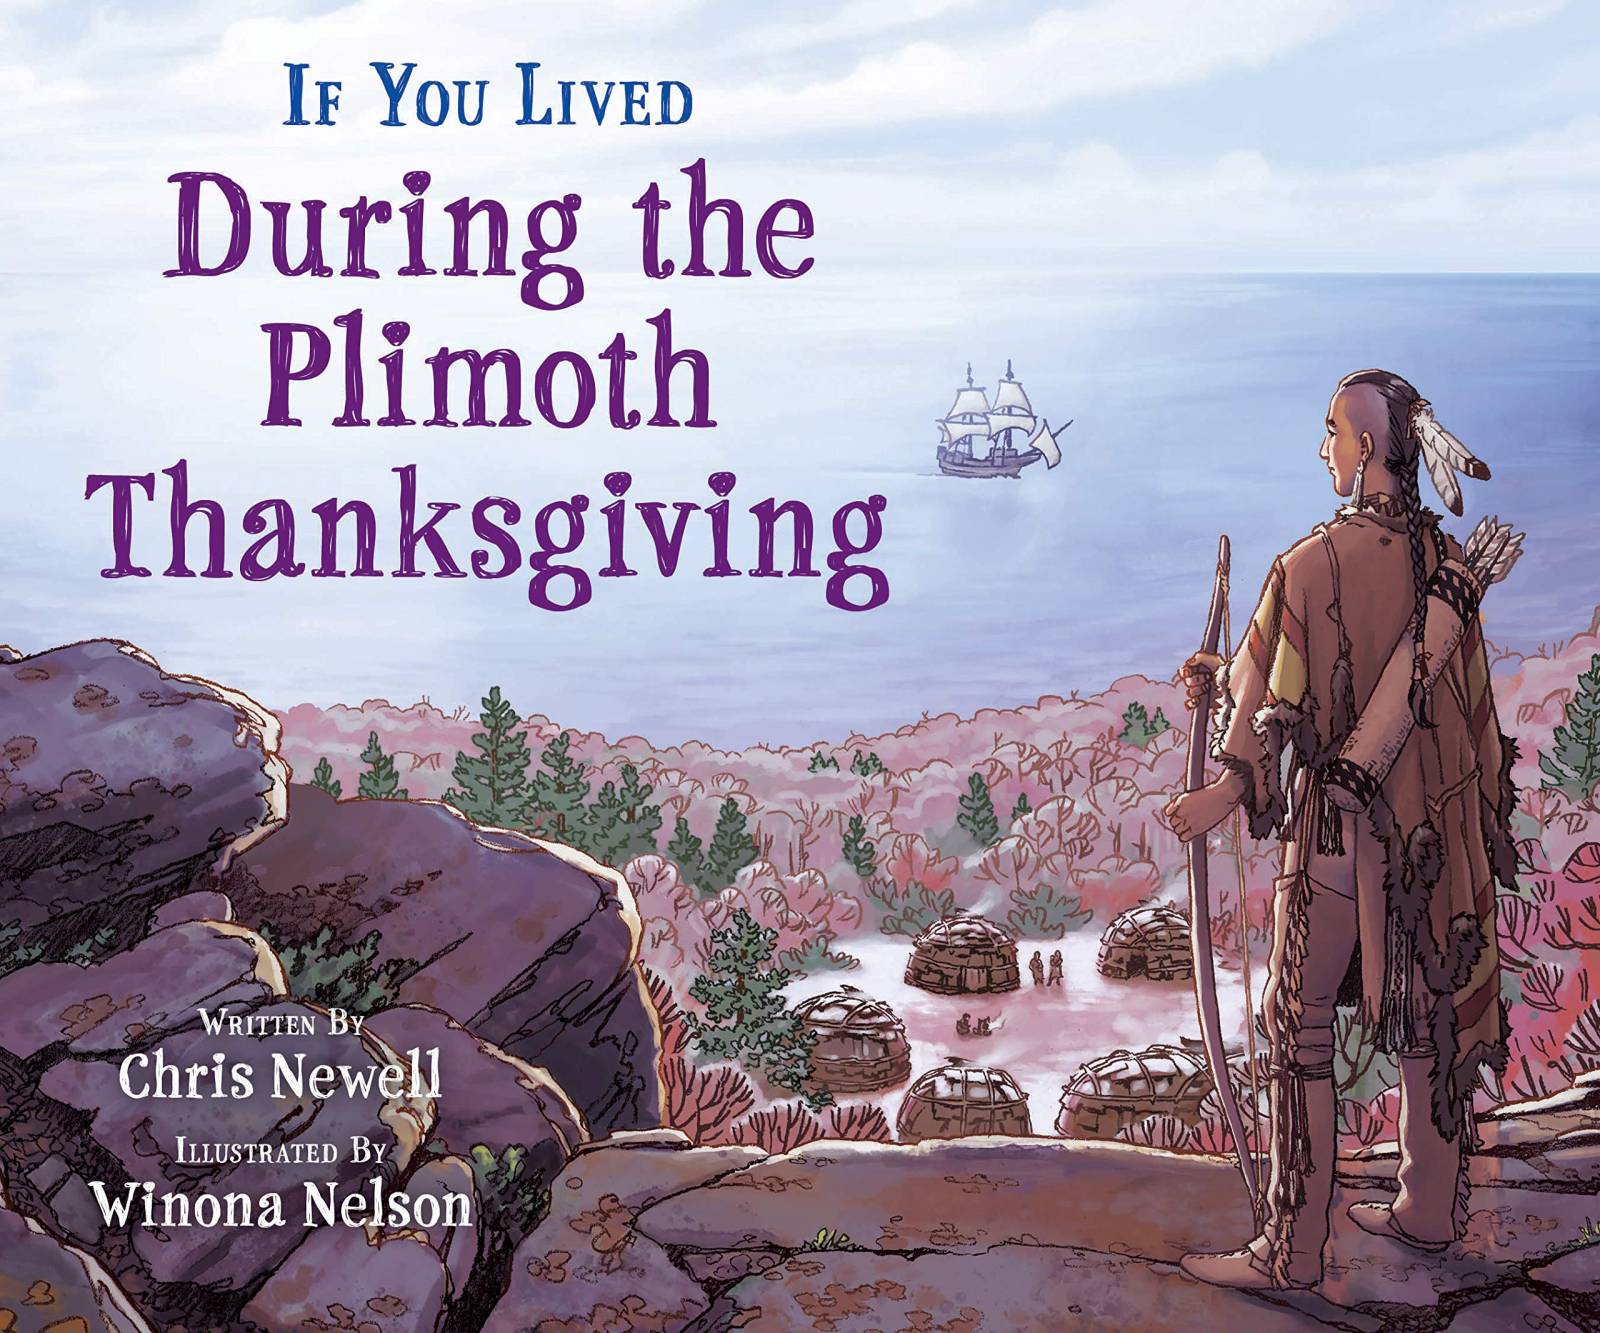 “If You Lived During The Plimoth Thanksgiving” by Chris Newell